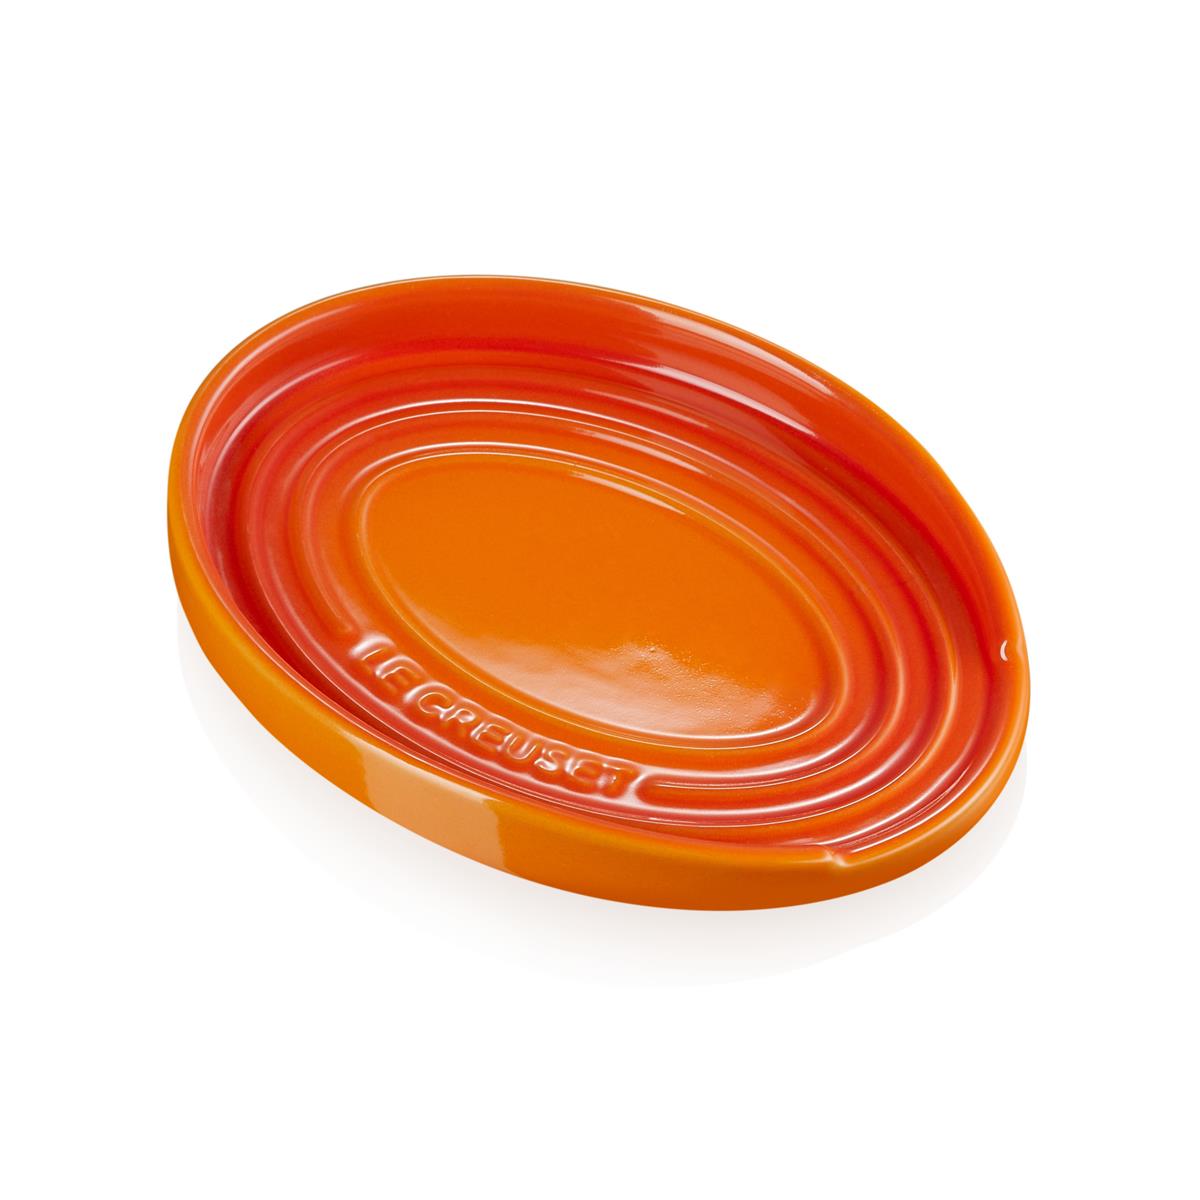 What are the features of the le creuset spoon rest?